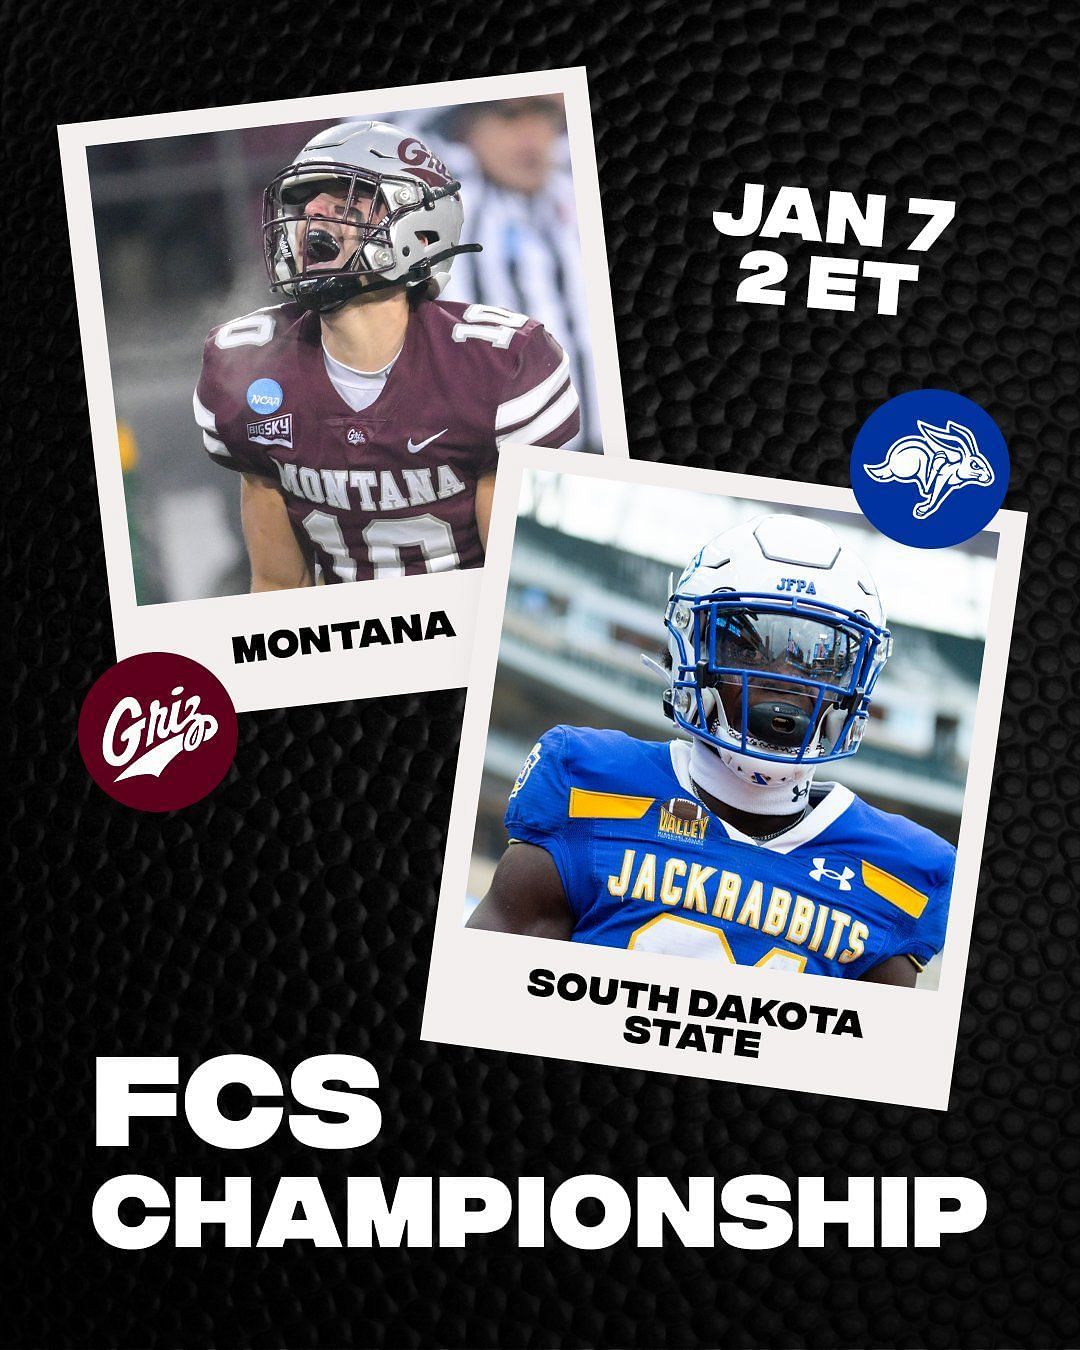 Why is the FCS national championship game on Sunday? Taking a closer